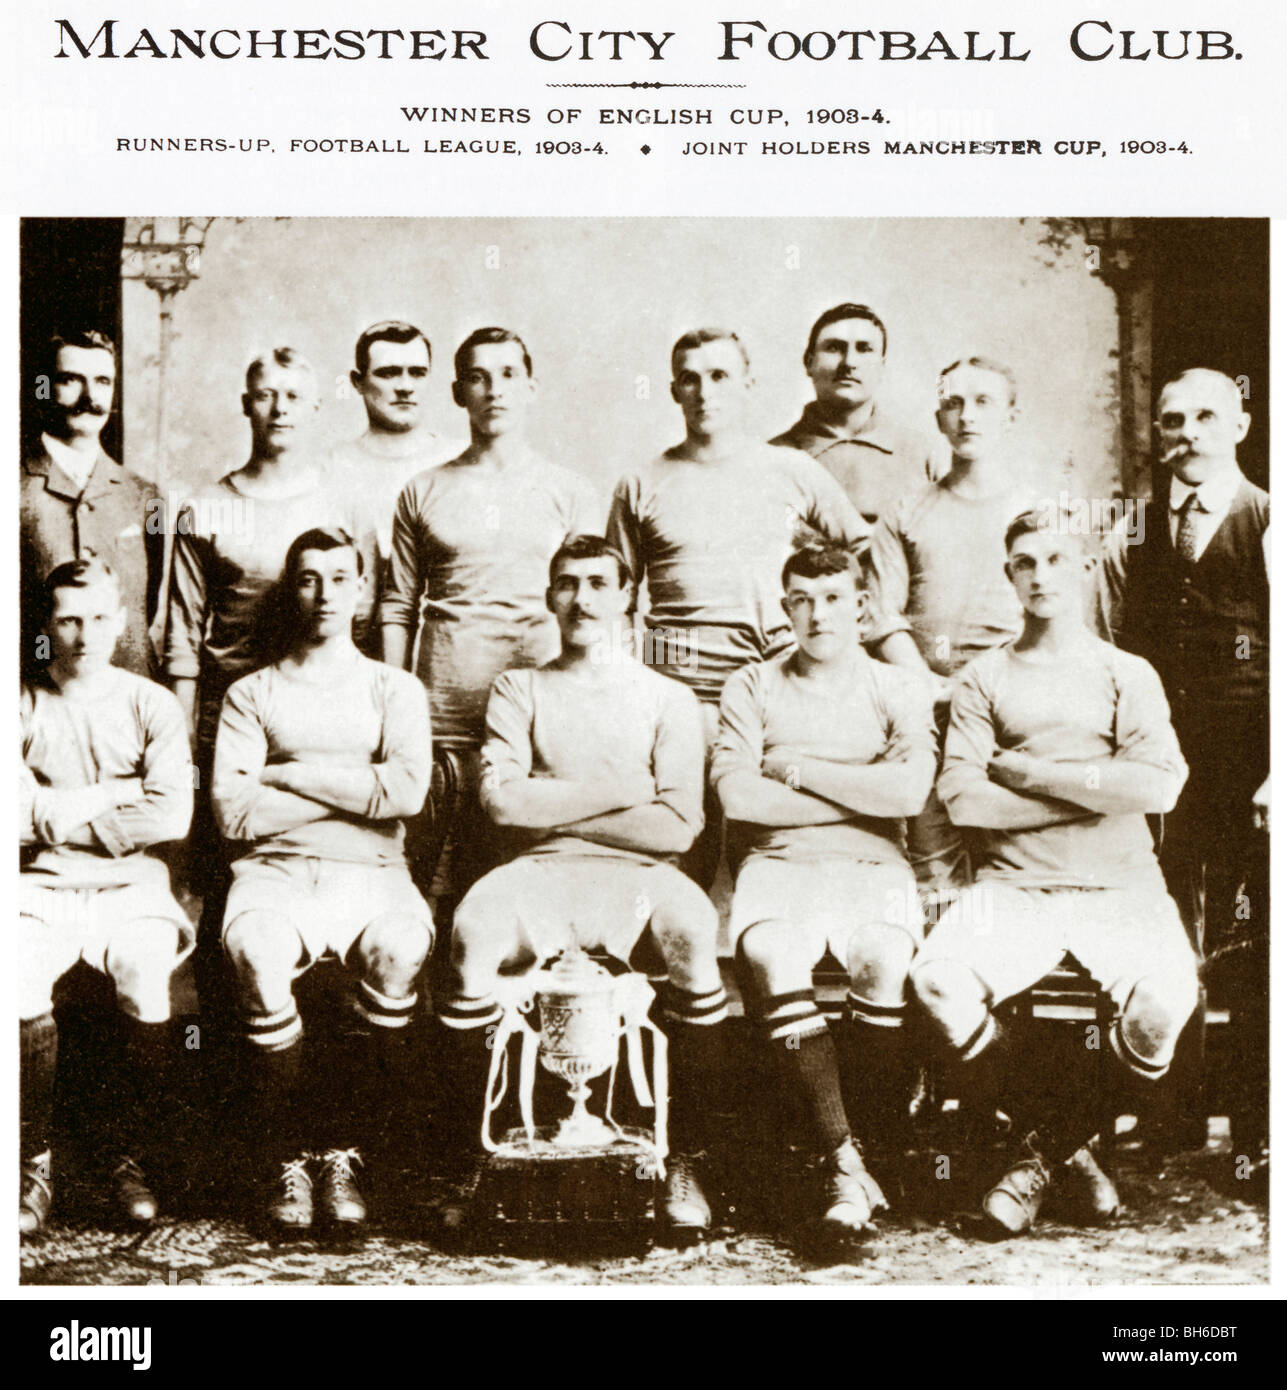 manchester-city-1904-fa-cup-winners-team-photo-with-welsh-wizard-billy-BH6DBT.jpg